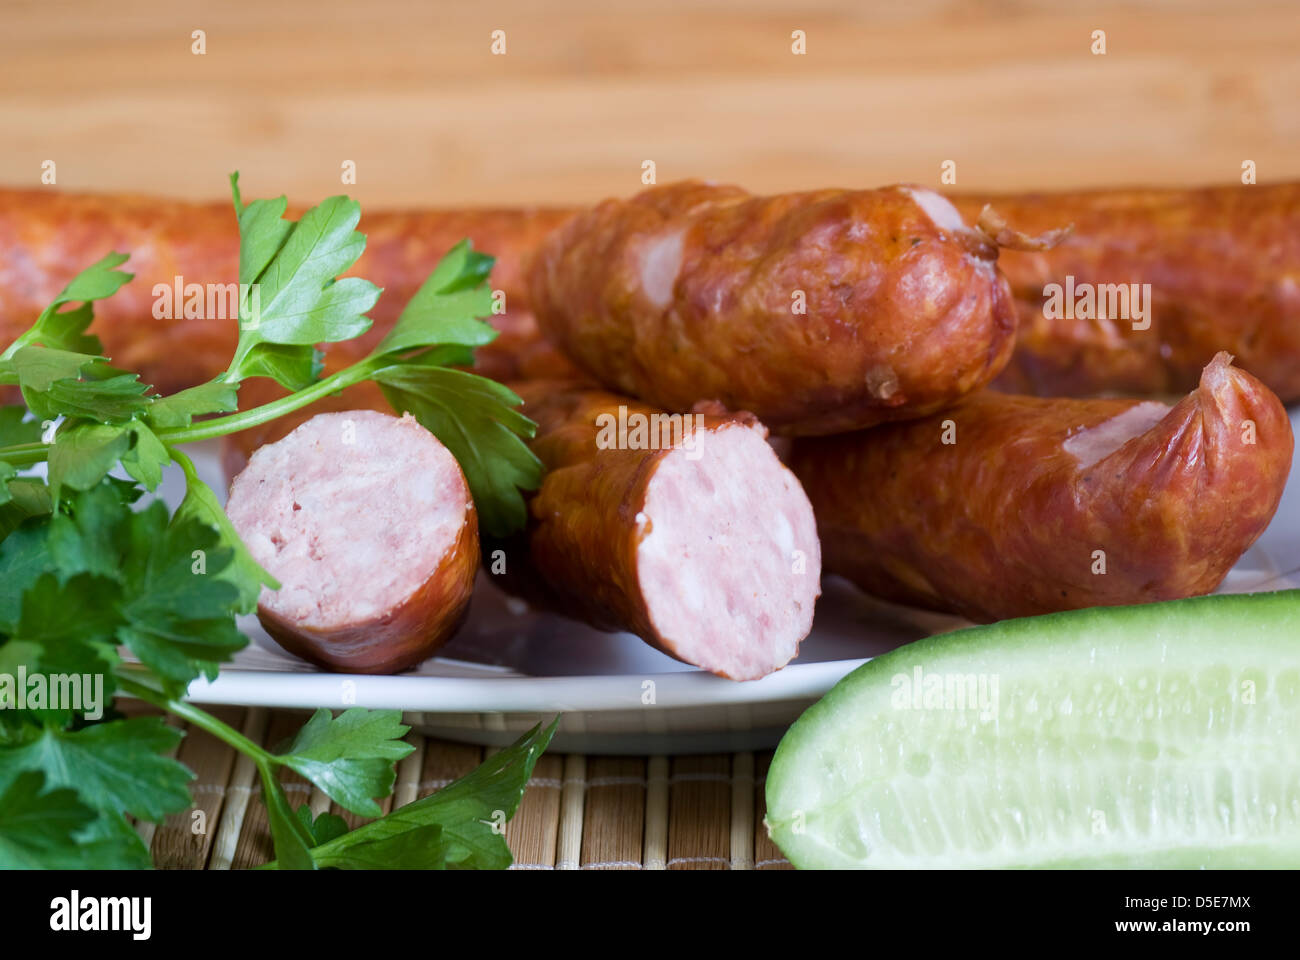 piece of the pork sausage with parsley and cucumber Stock Photo